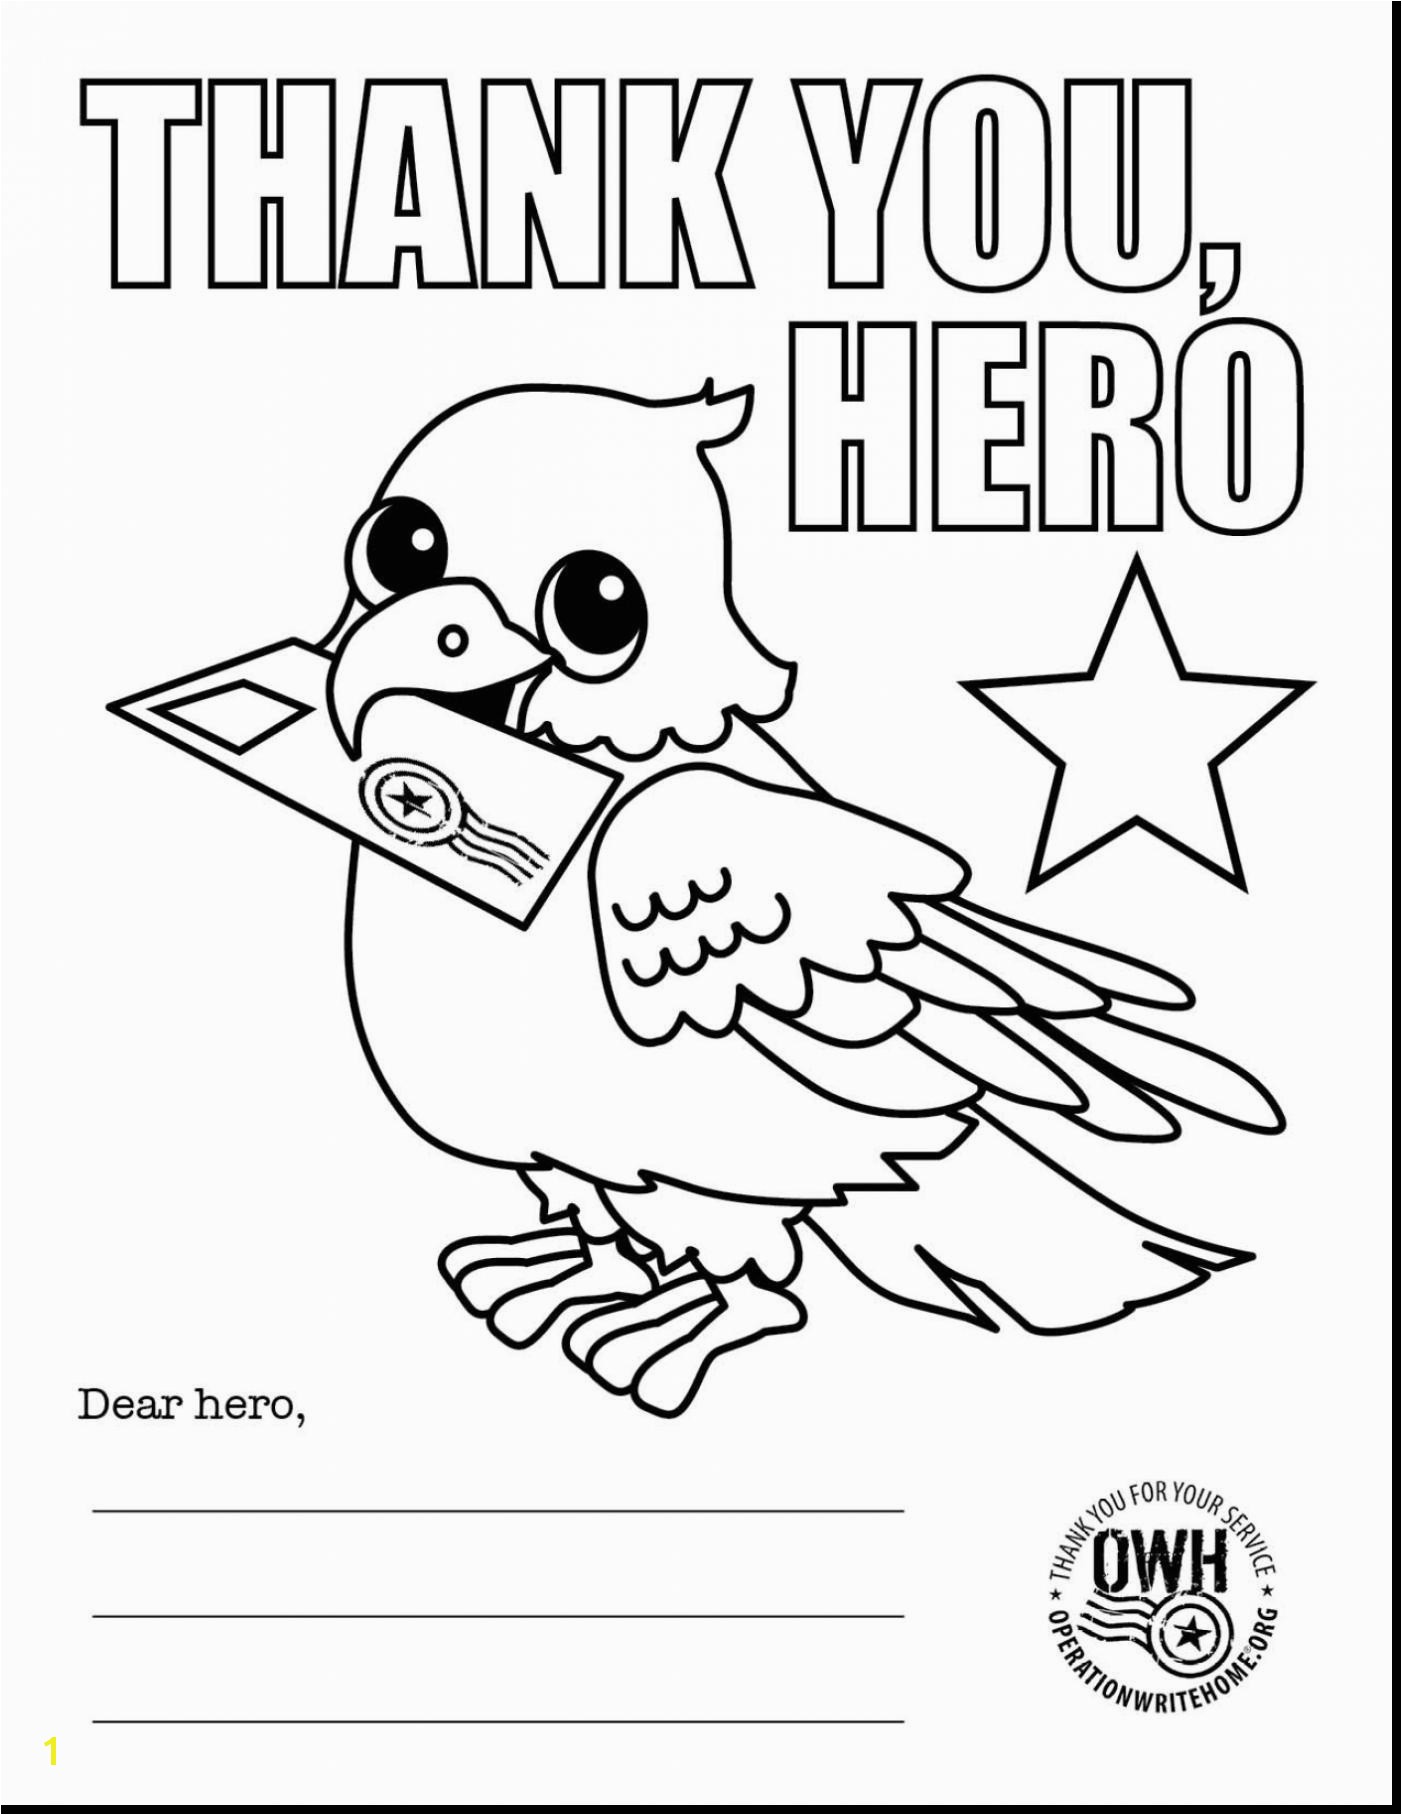 Thank You Coloring Pages for Teachers Inspirational Coloring Pages Teacher Appreciation Week Katesgrove